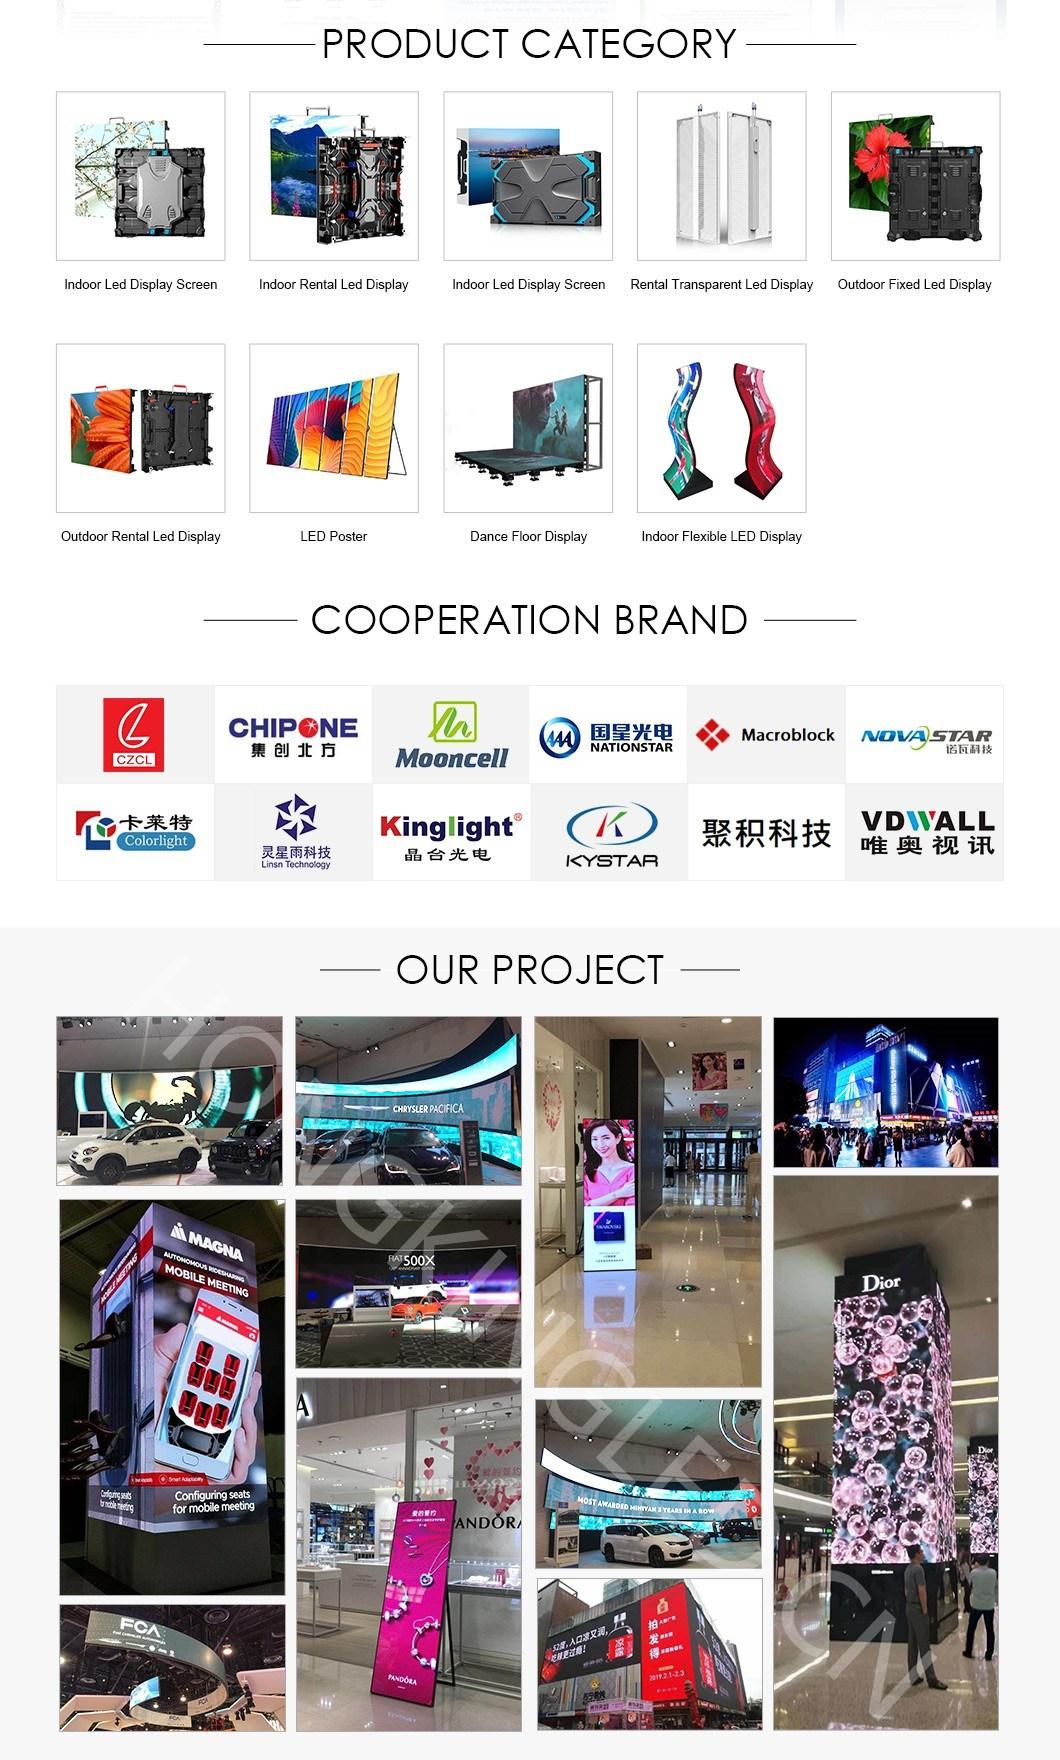 High Quality P5 Outdoor Full Waterproof Advertising LED Display/Screen